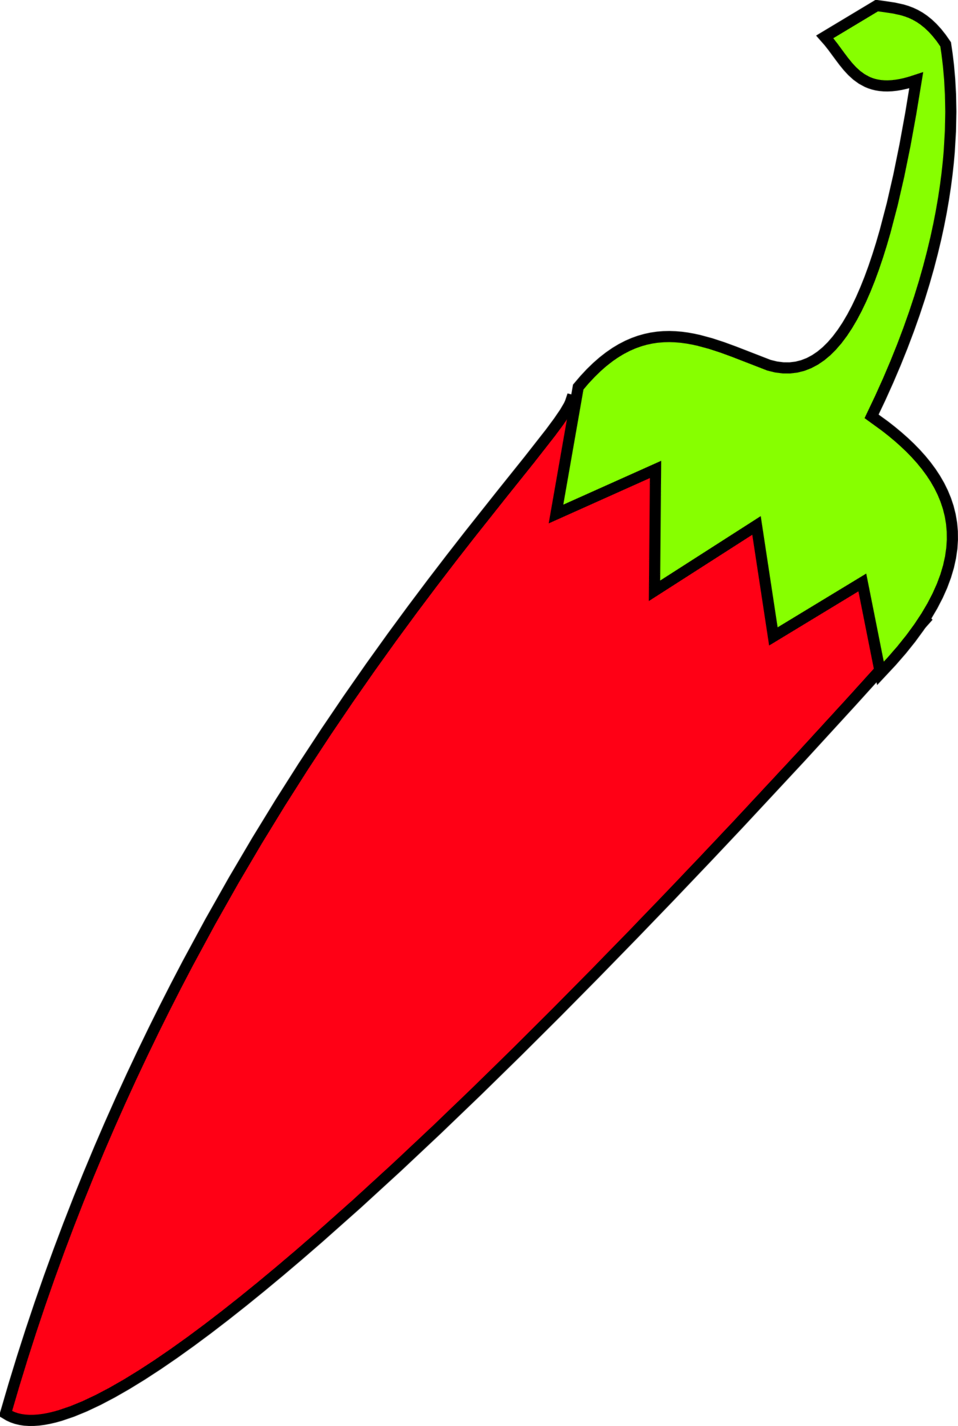 And Chilli Green Red Free Transparent Image HQ PNG Image